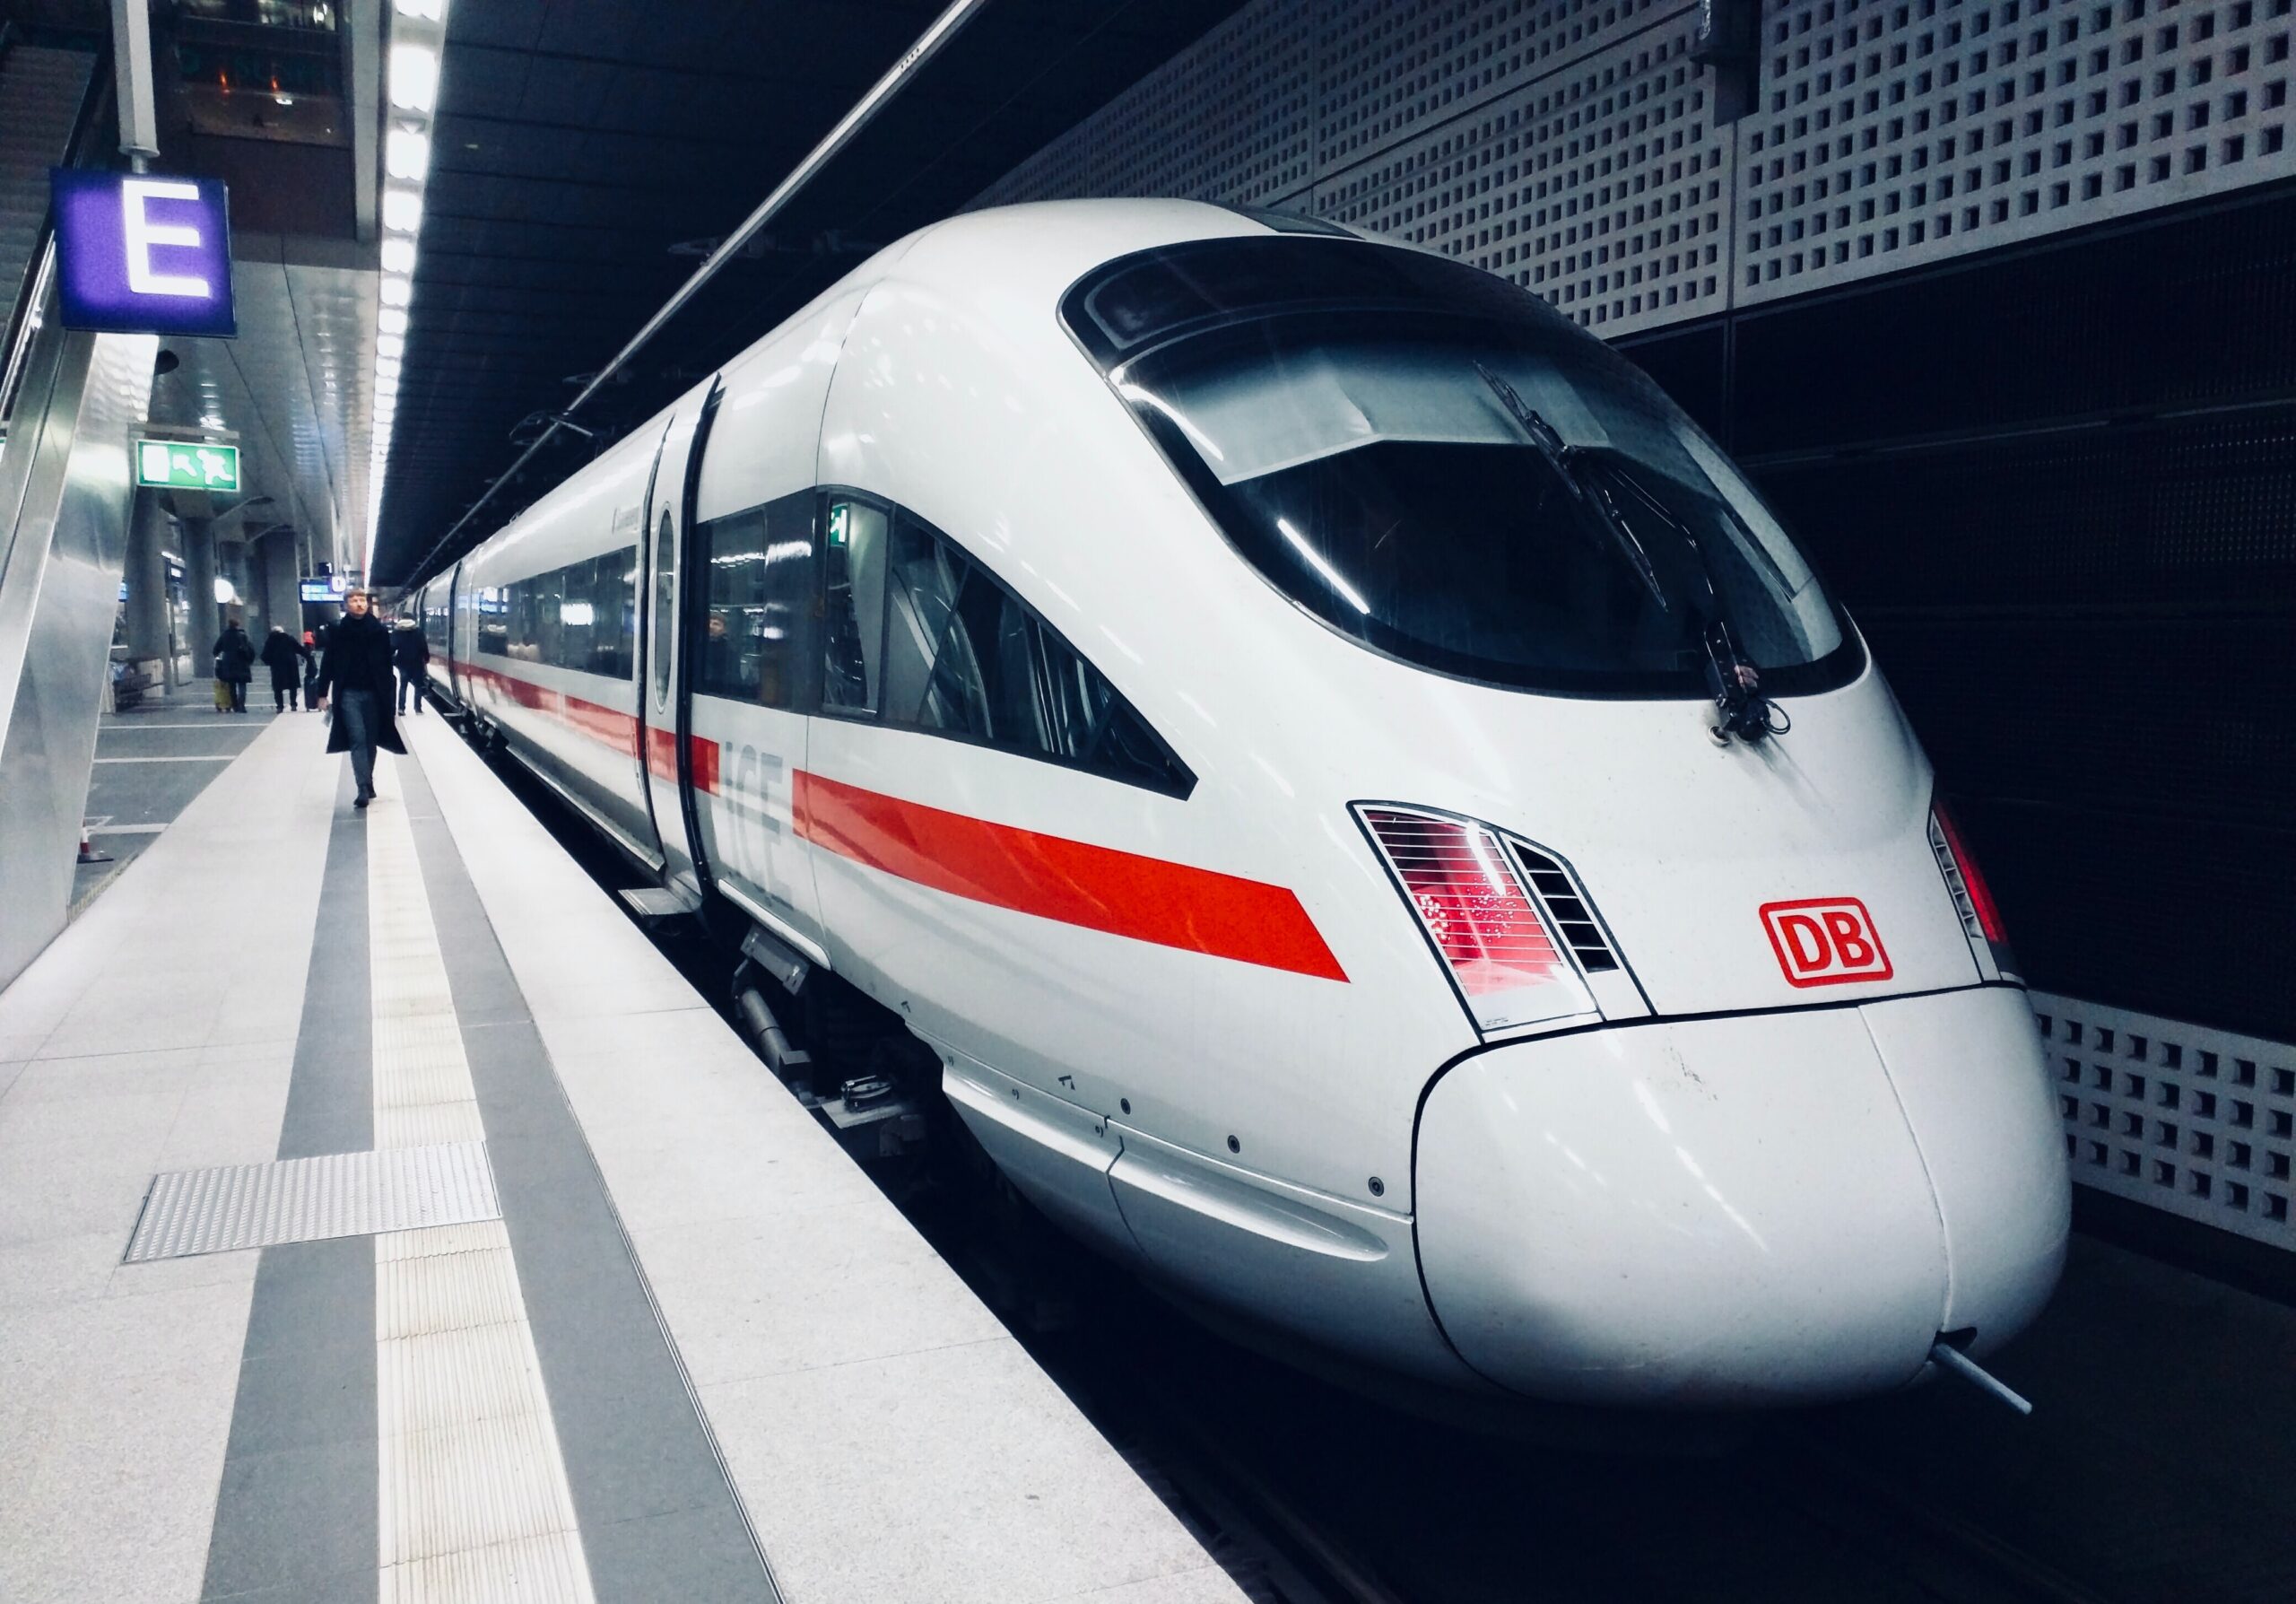 United Partners with Lufthansa and Deutsche Bahn for Rail Connections in Frankfurt